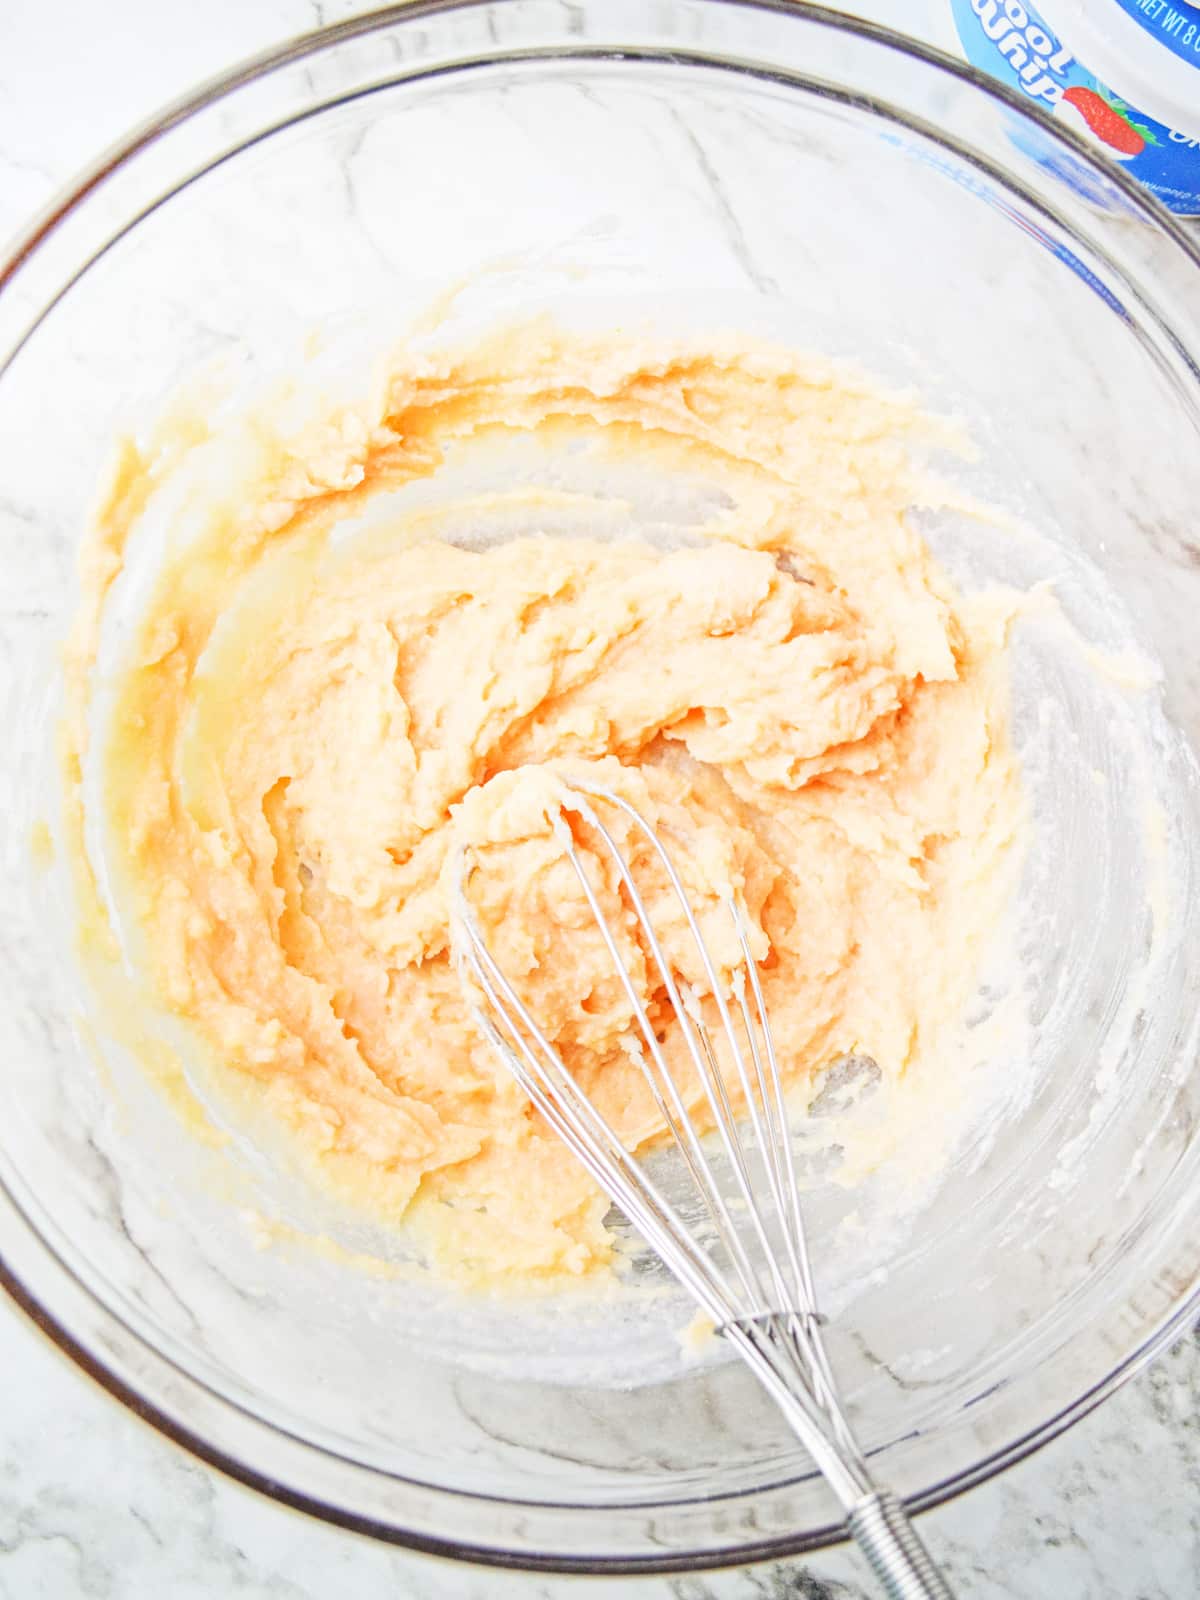 whisk together yogurt and pudding mix in mixing bowl